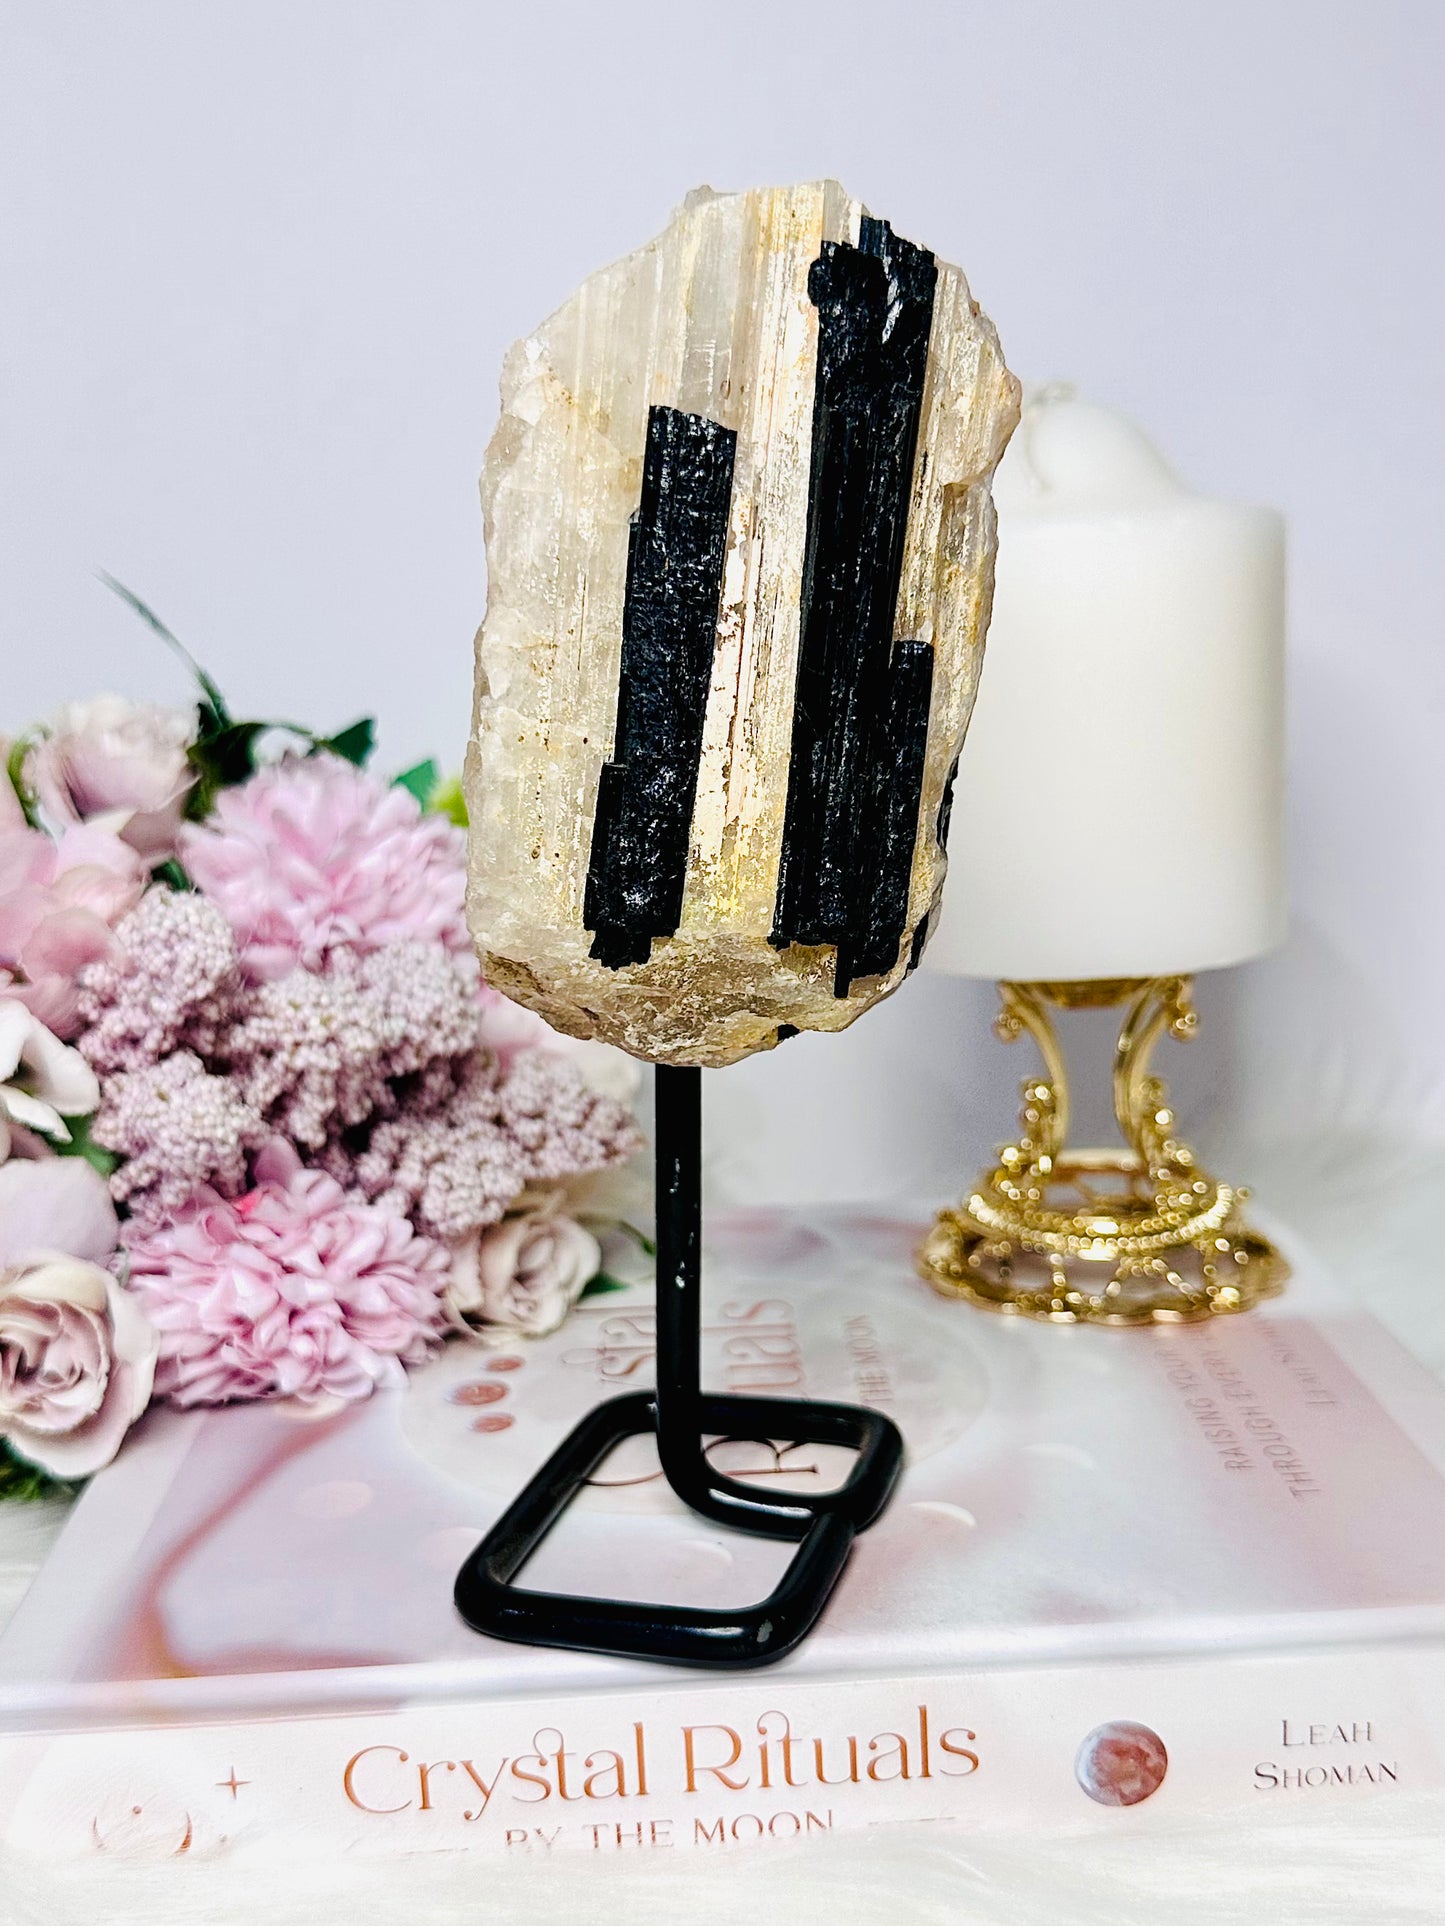 A Protective Stone ~ Gorgeous Large 18cm Natural Black Tourmaline In Quartz Specimen 629gram On Stand From Brazil